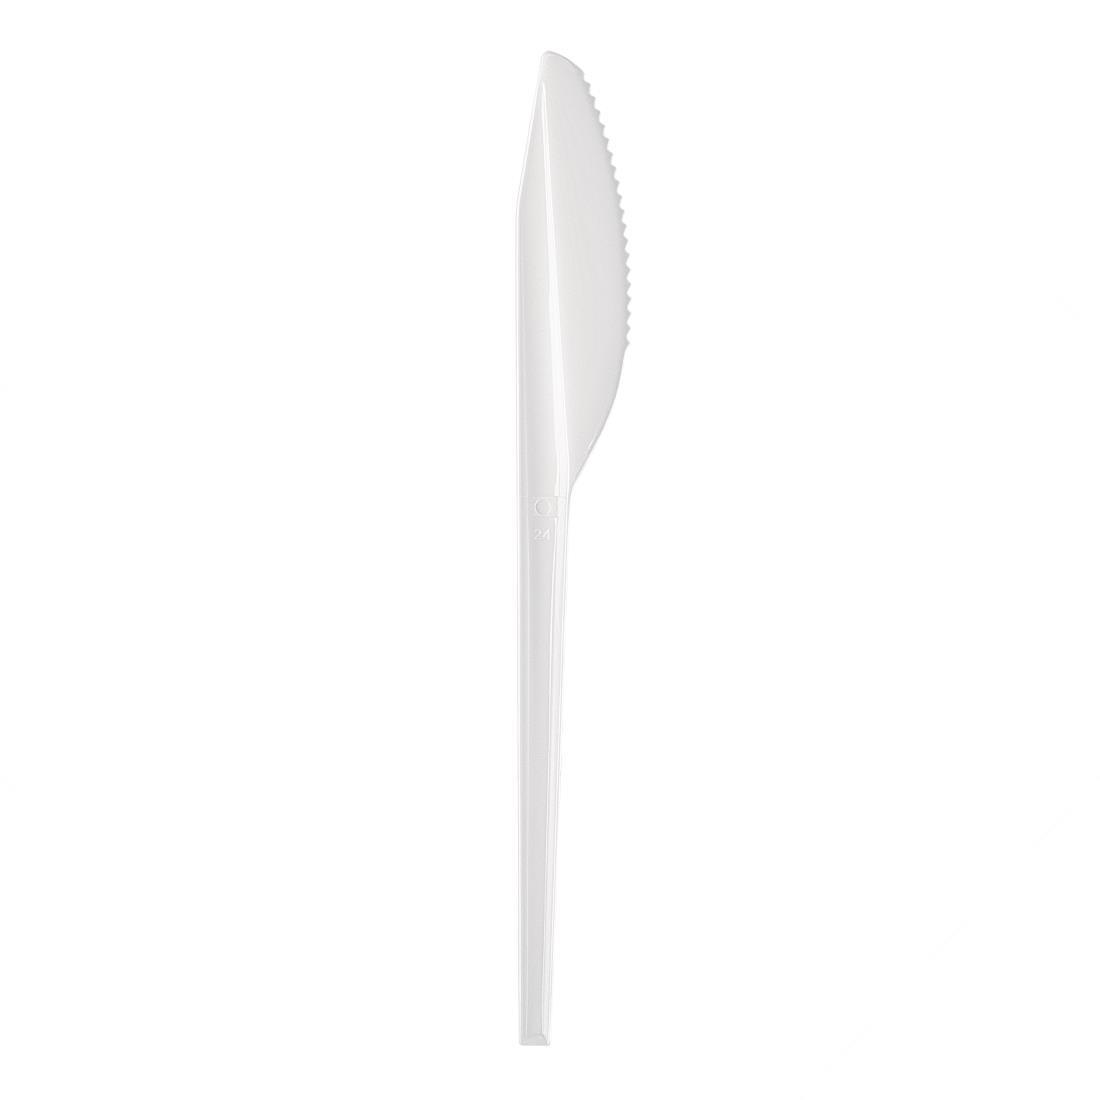 Fiesta Recyclable Plastic Knives White (Pack of 100) - U642  - 1